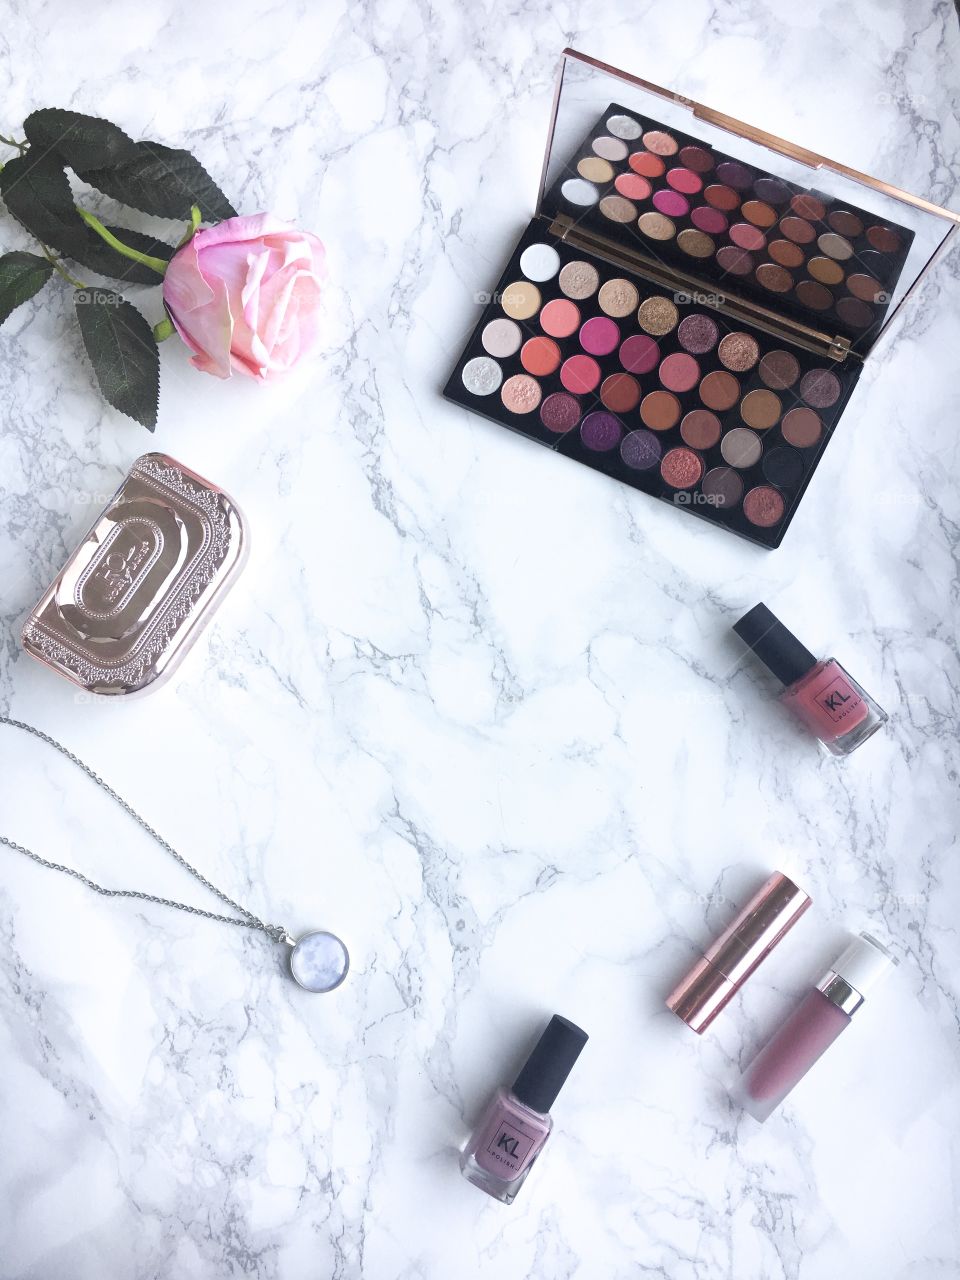 Makeup flat lay on a marble background, pink, eyeshadow palette, nail polish and makeup brushes.